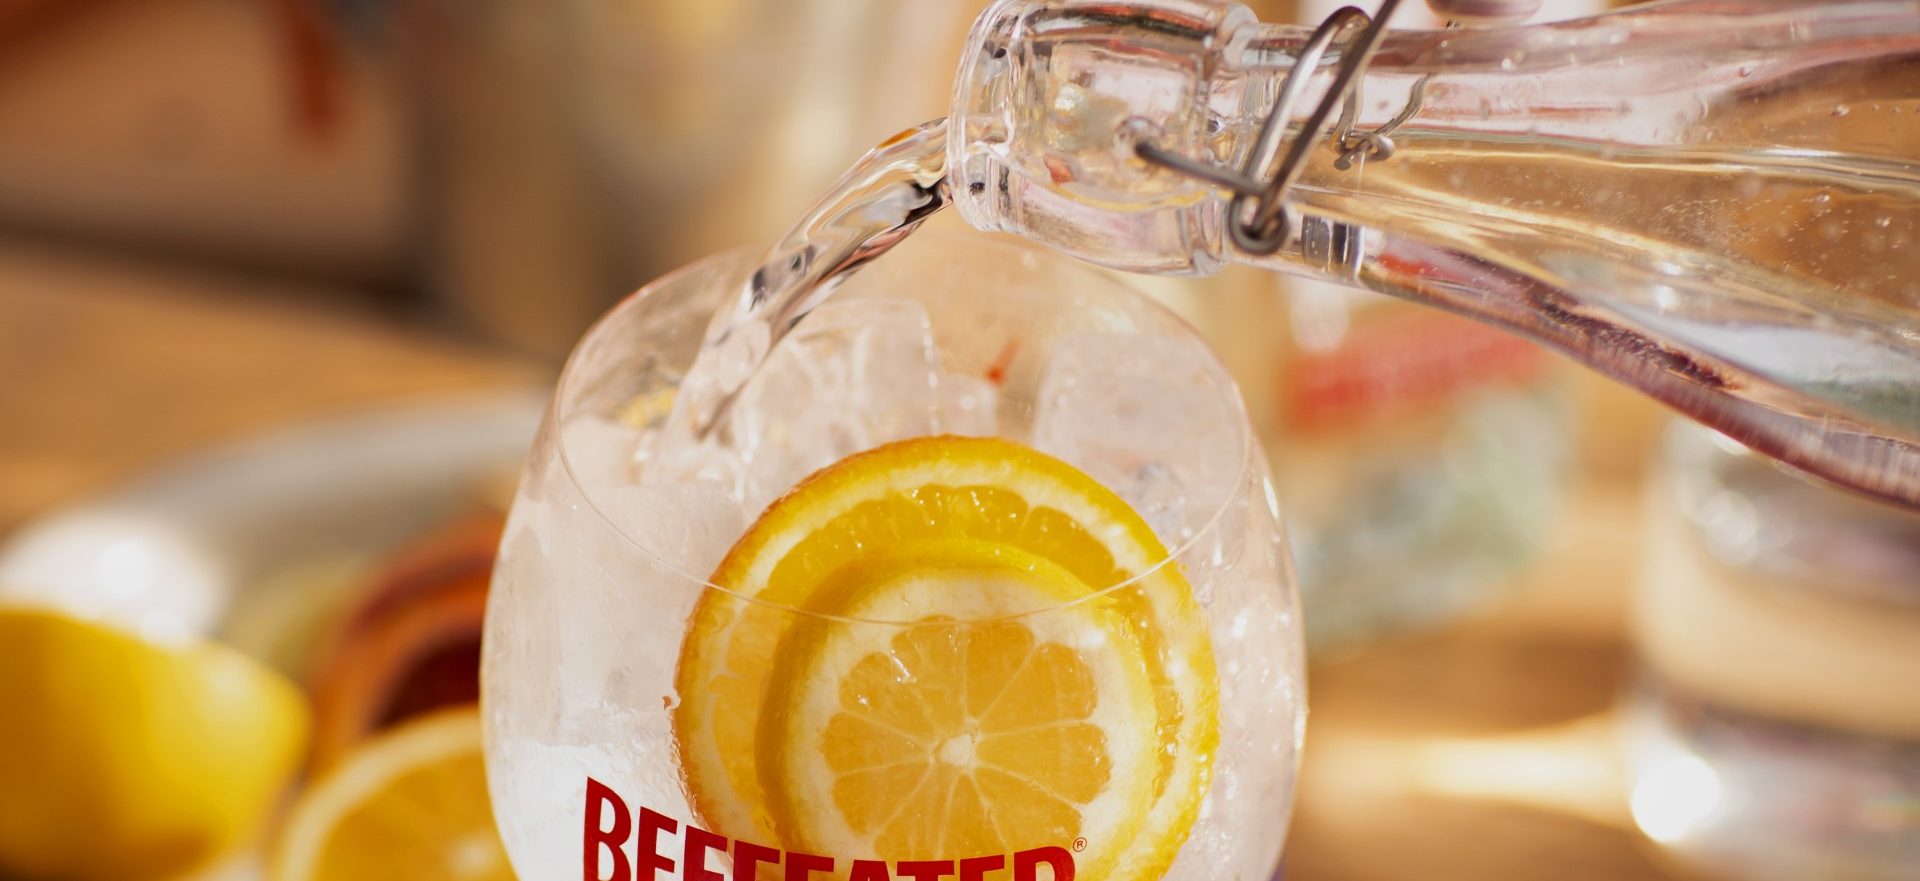 beefeater london dry gin tonic cocktail 2 aspect ratio 1647 756